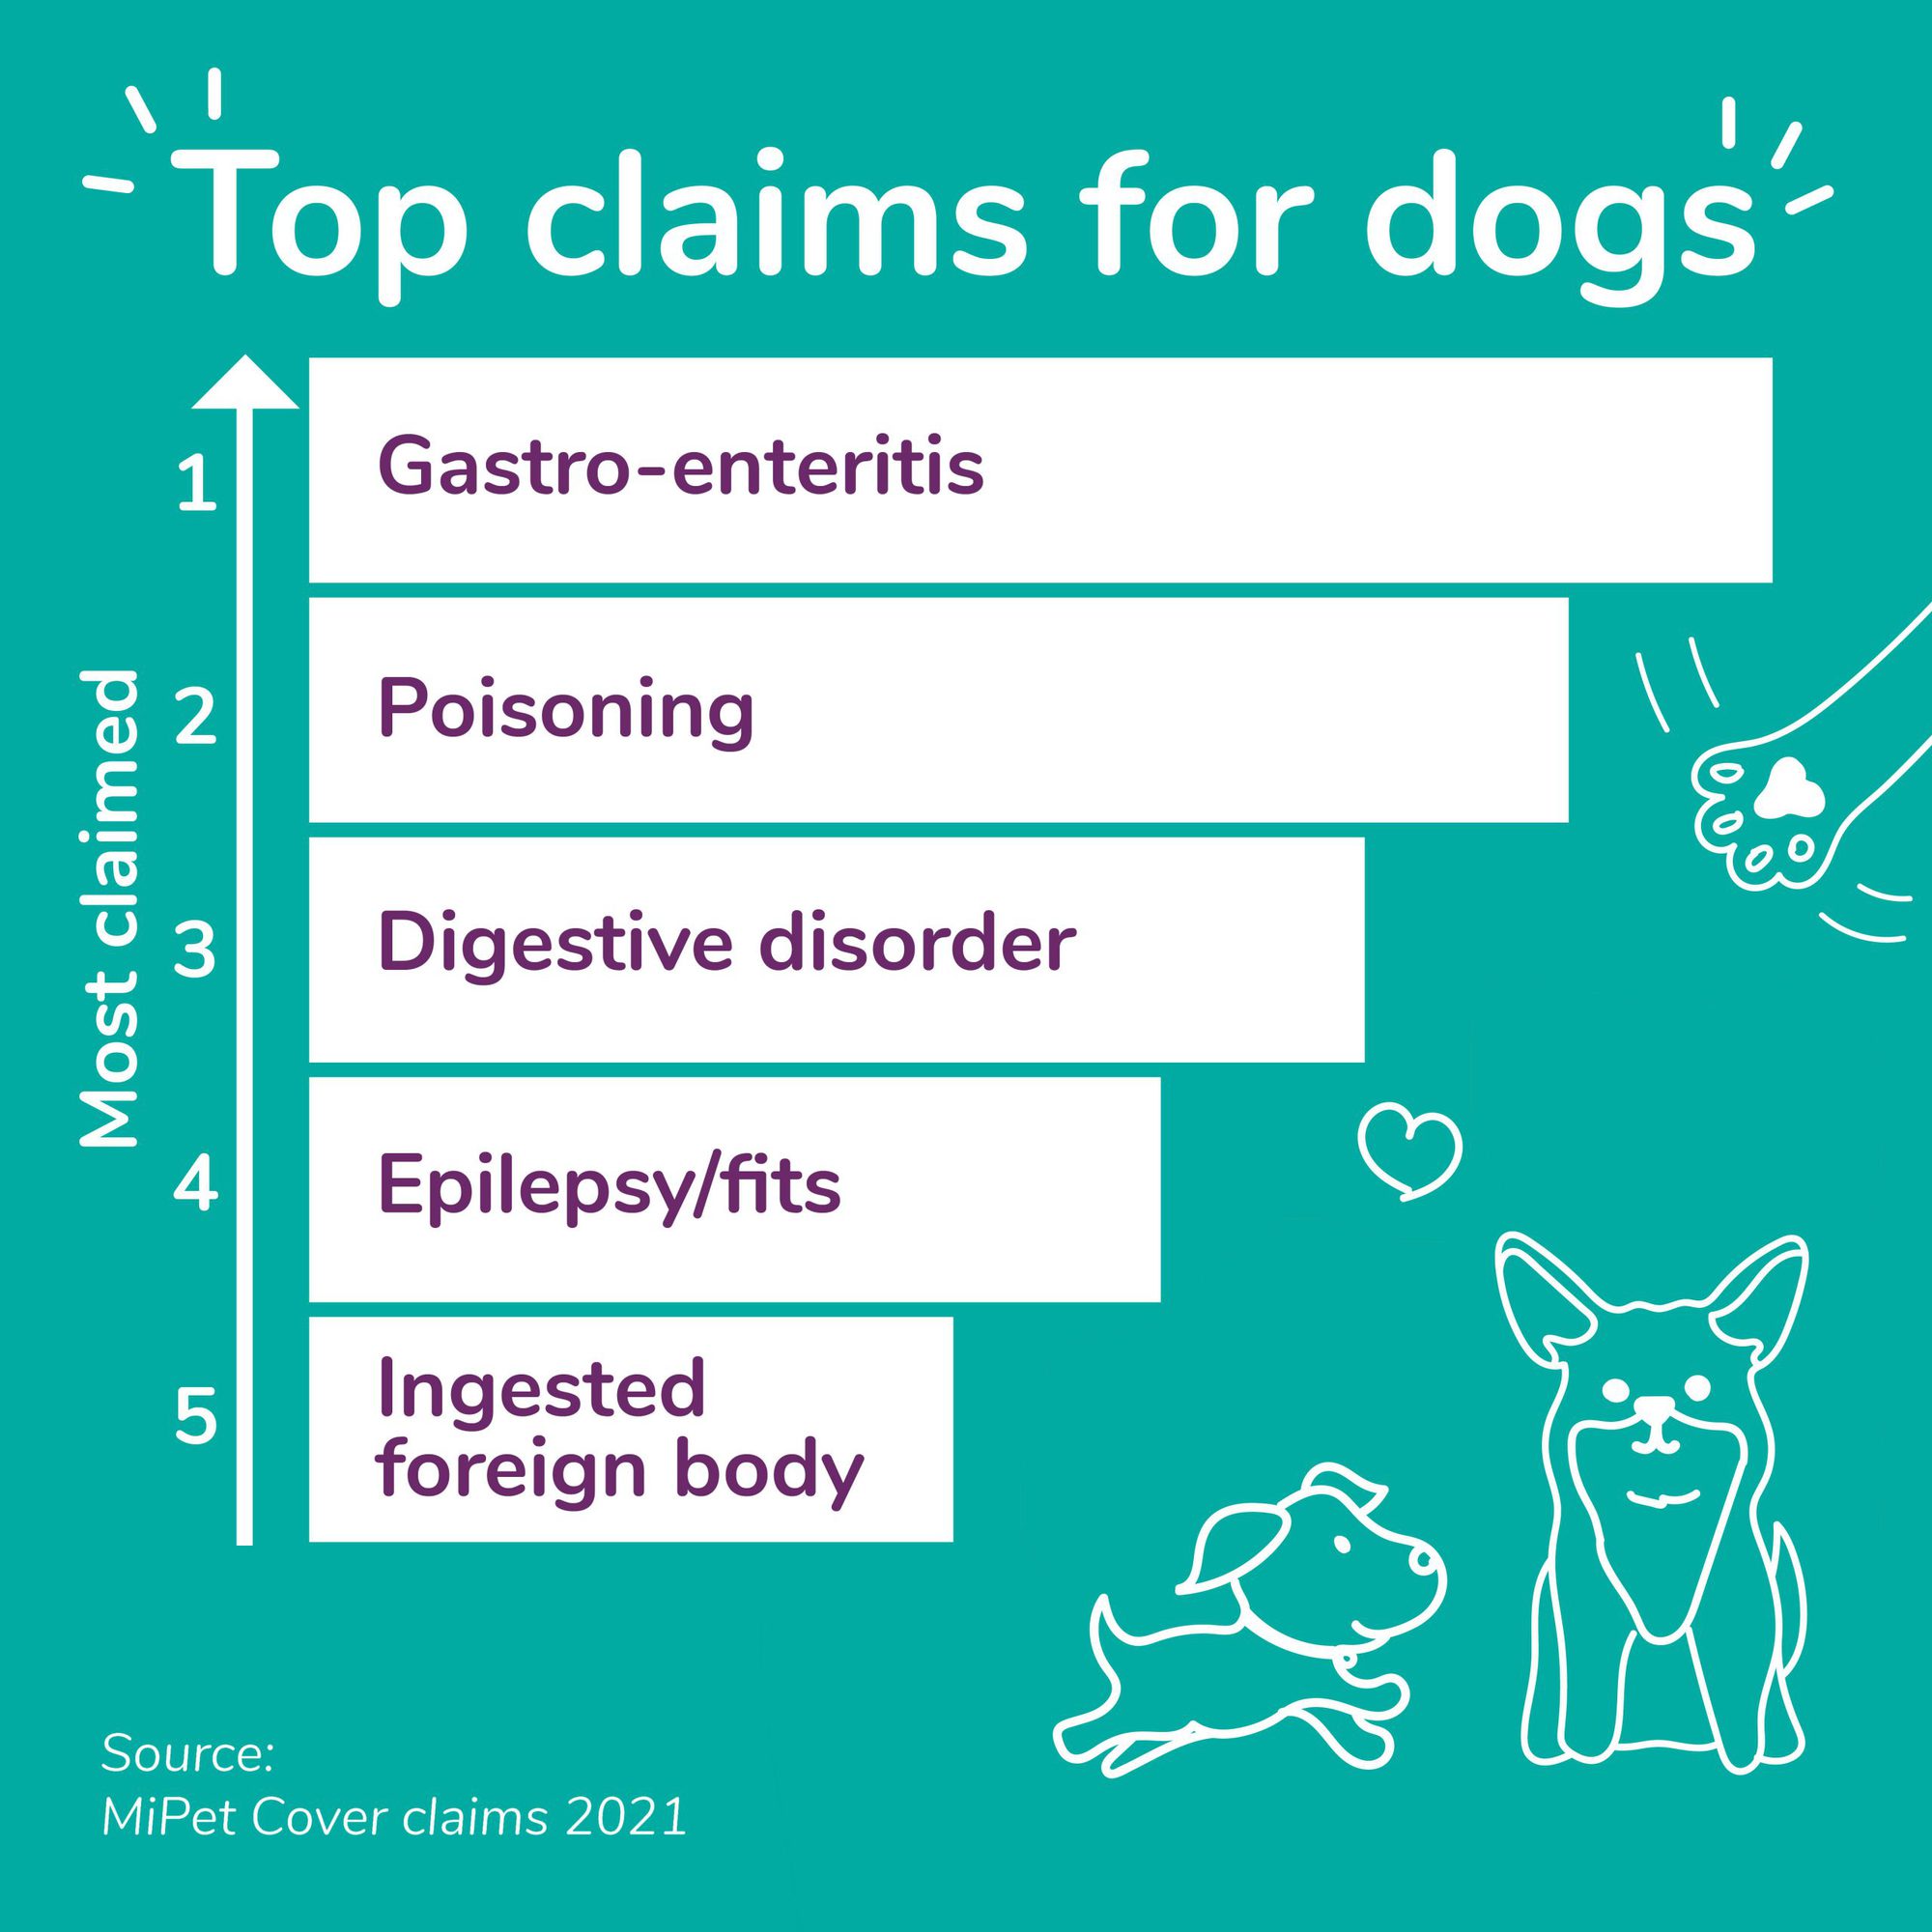 The top five pet insurance claims for dogs